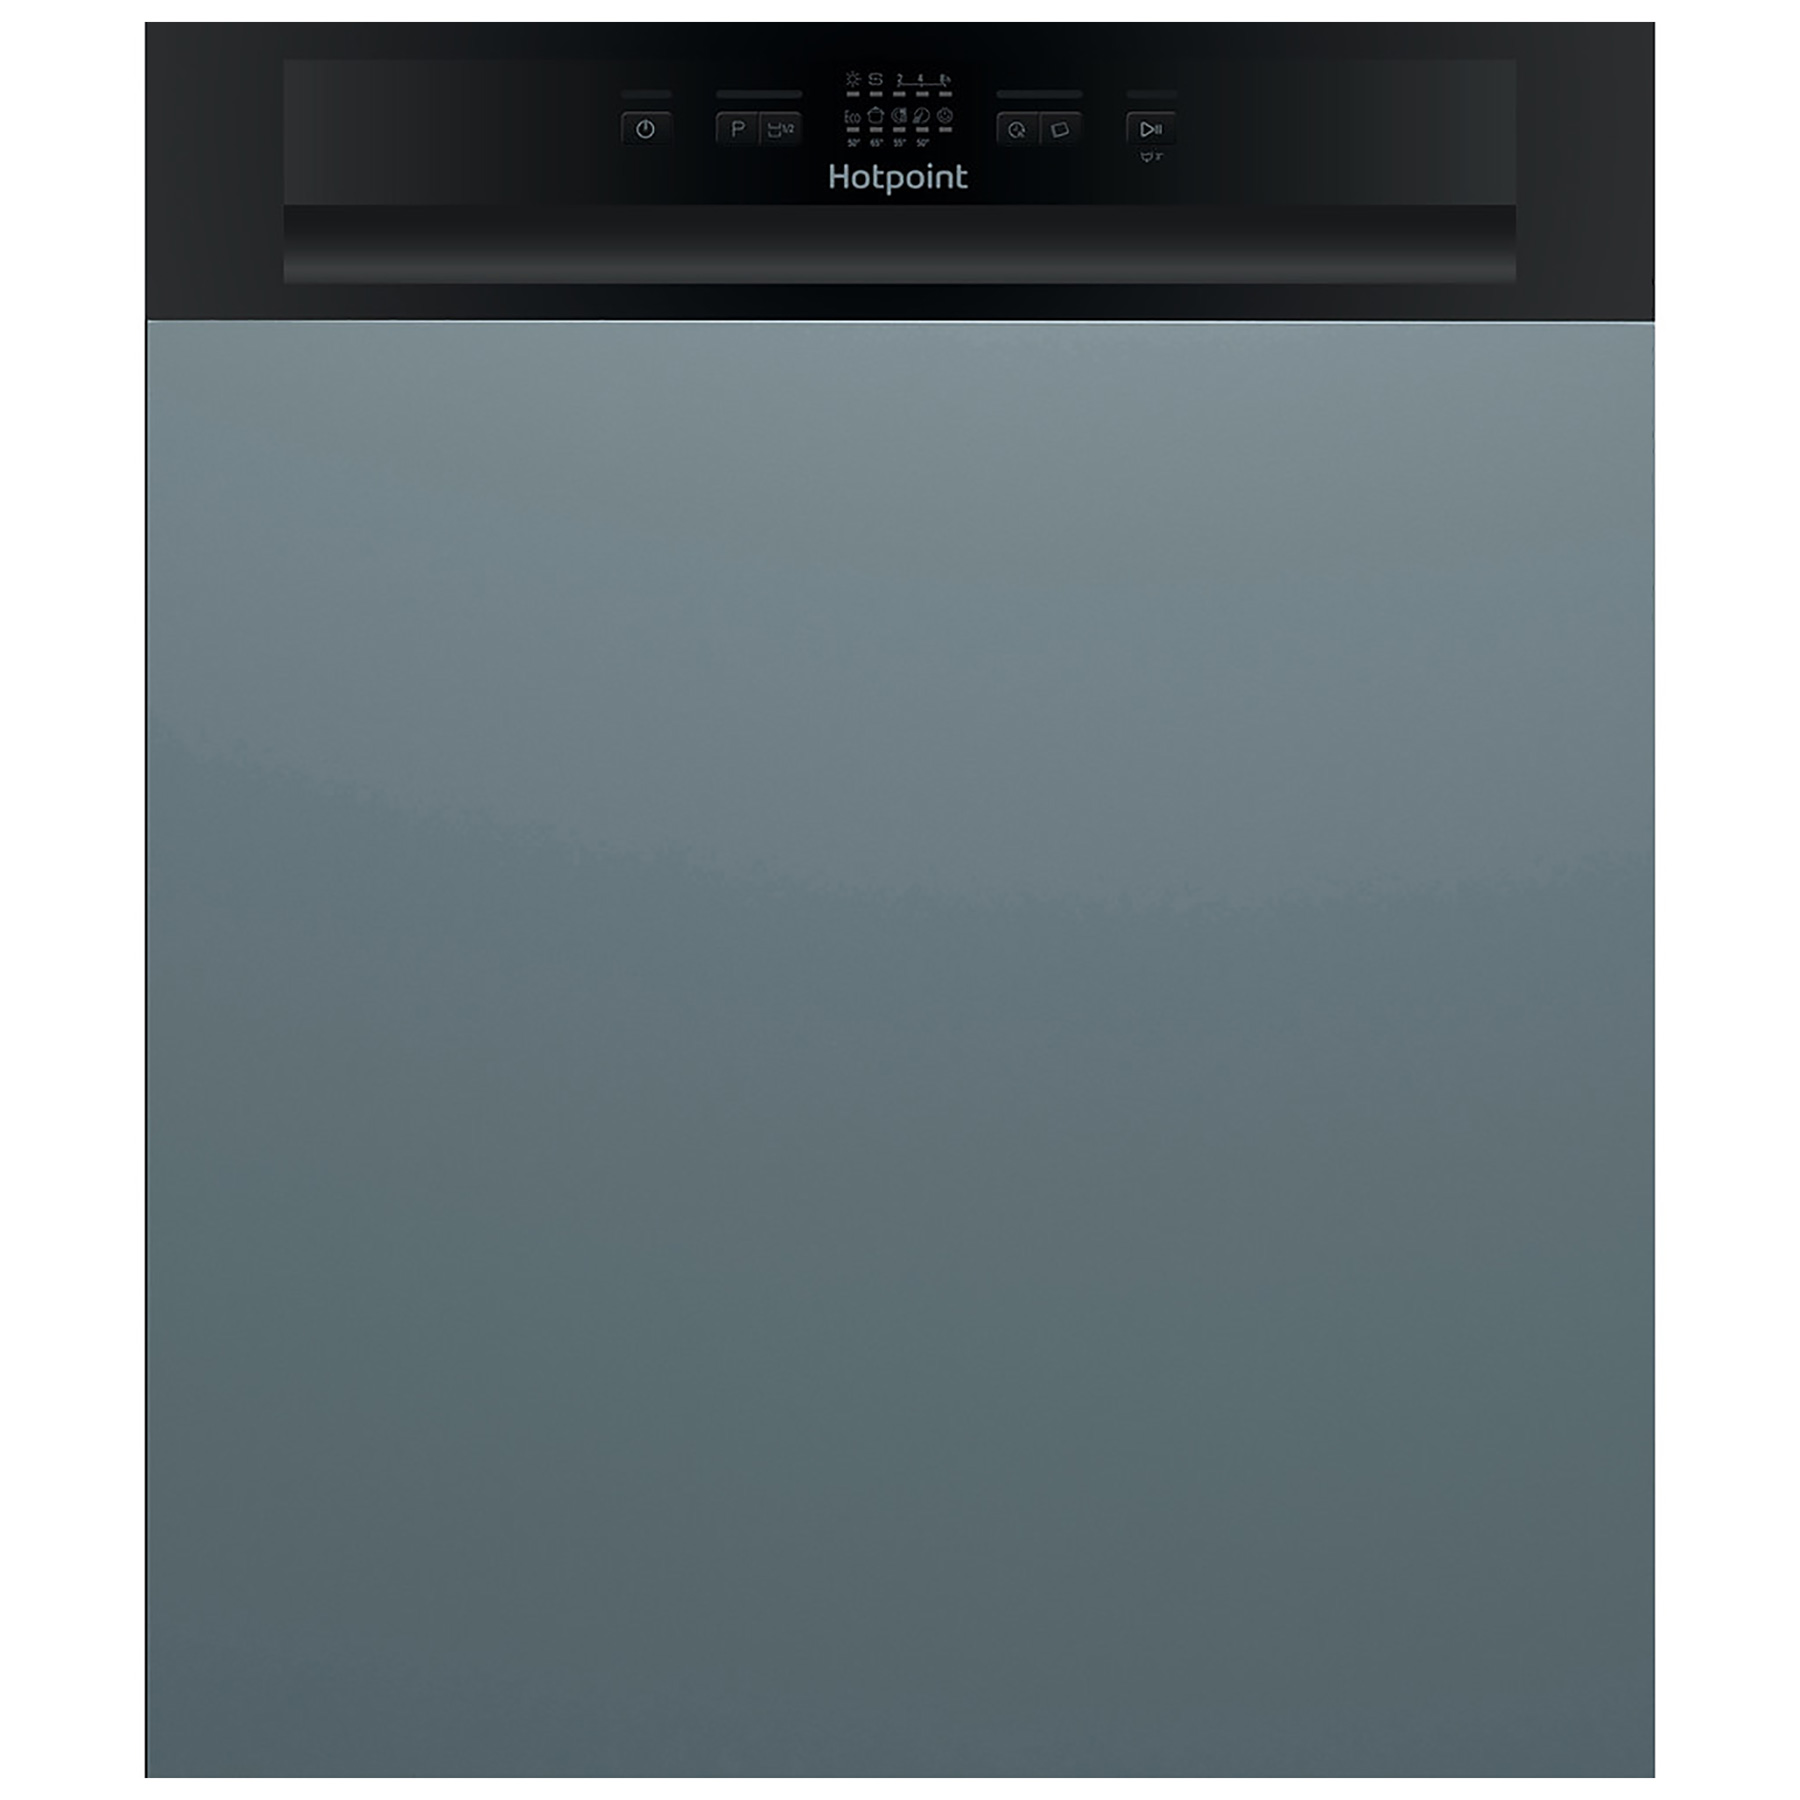 Image of Hotpoint HBC2B19 60cm Semi Integrated Dishwasher 13 Place A Rated